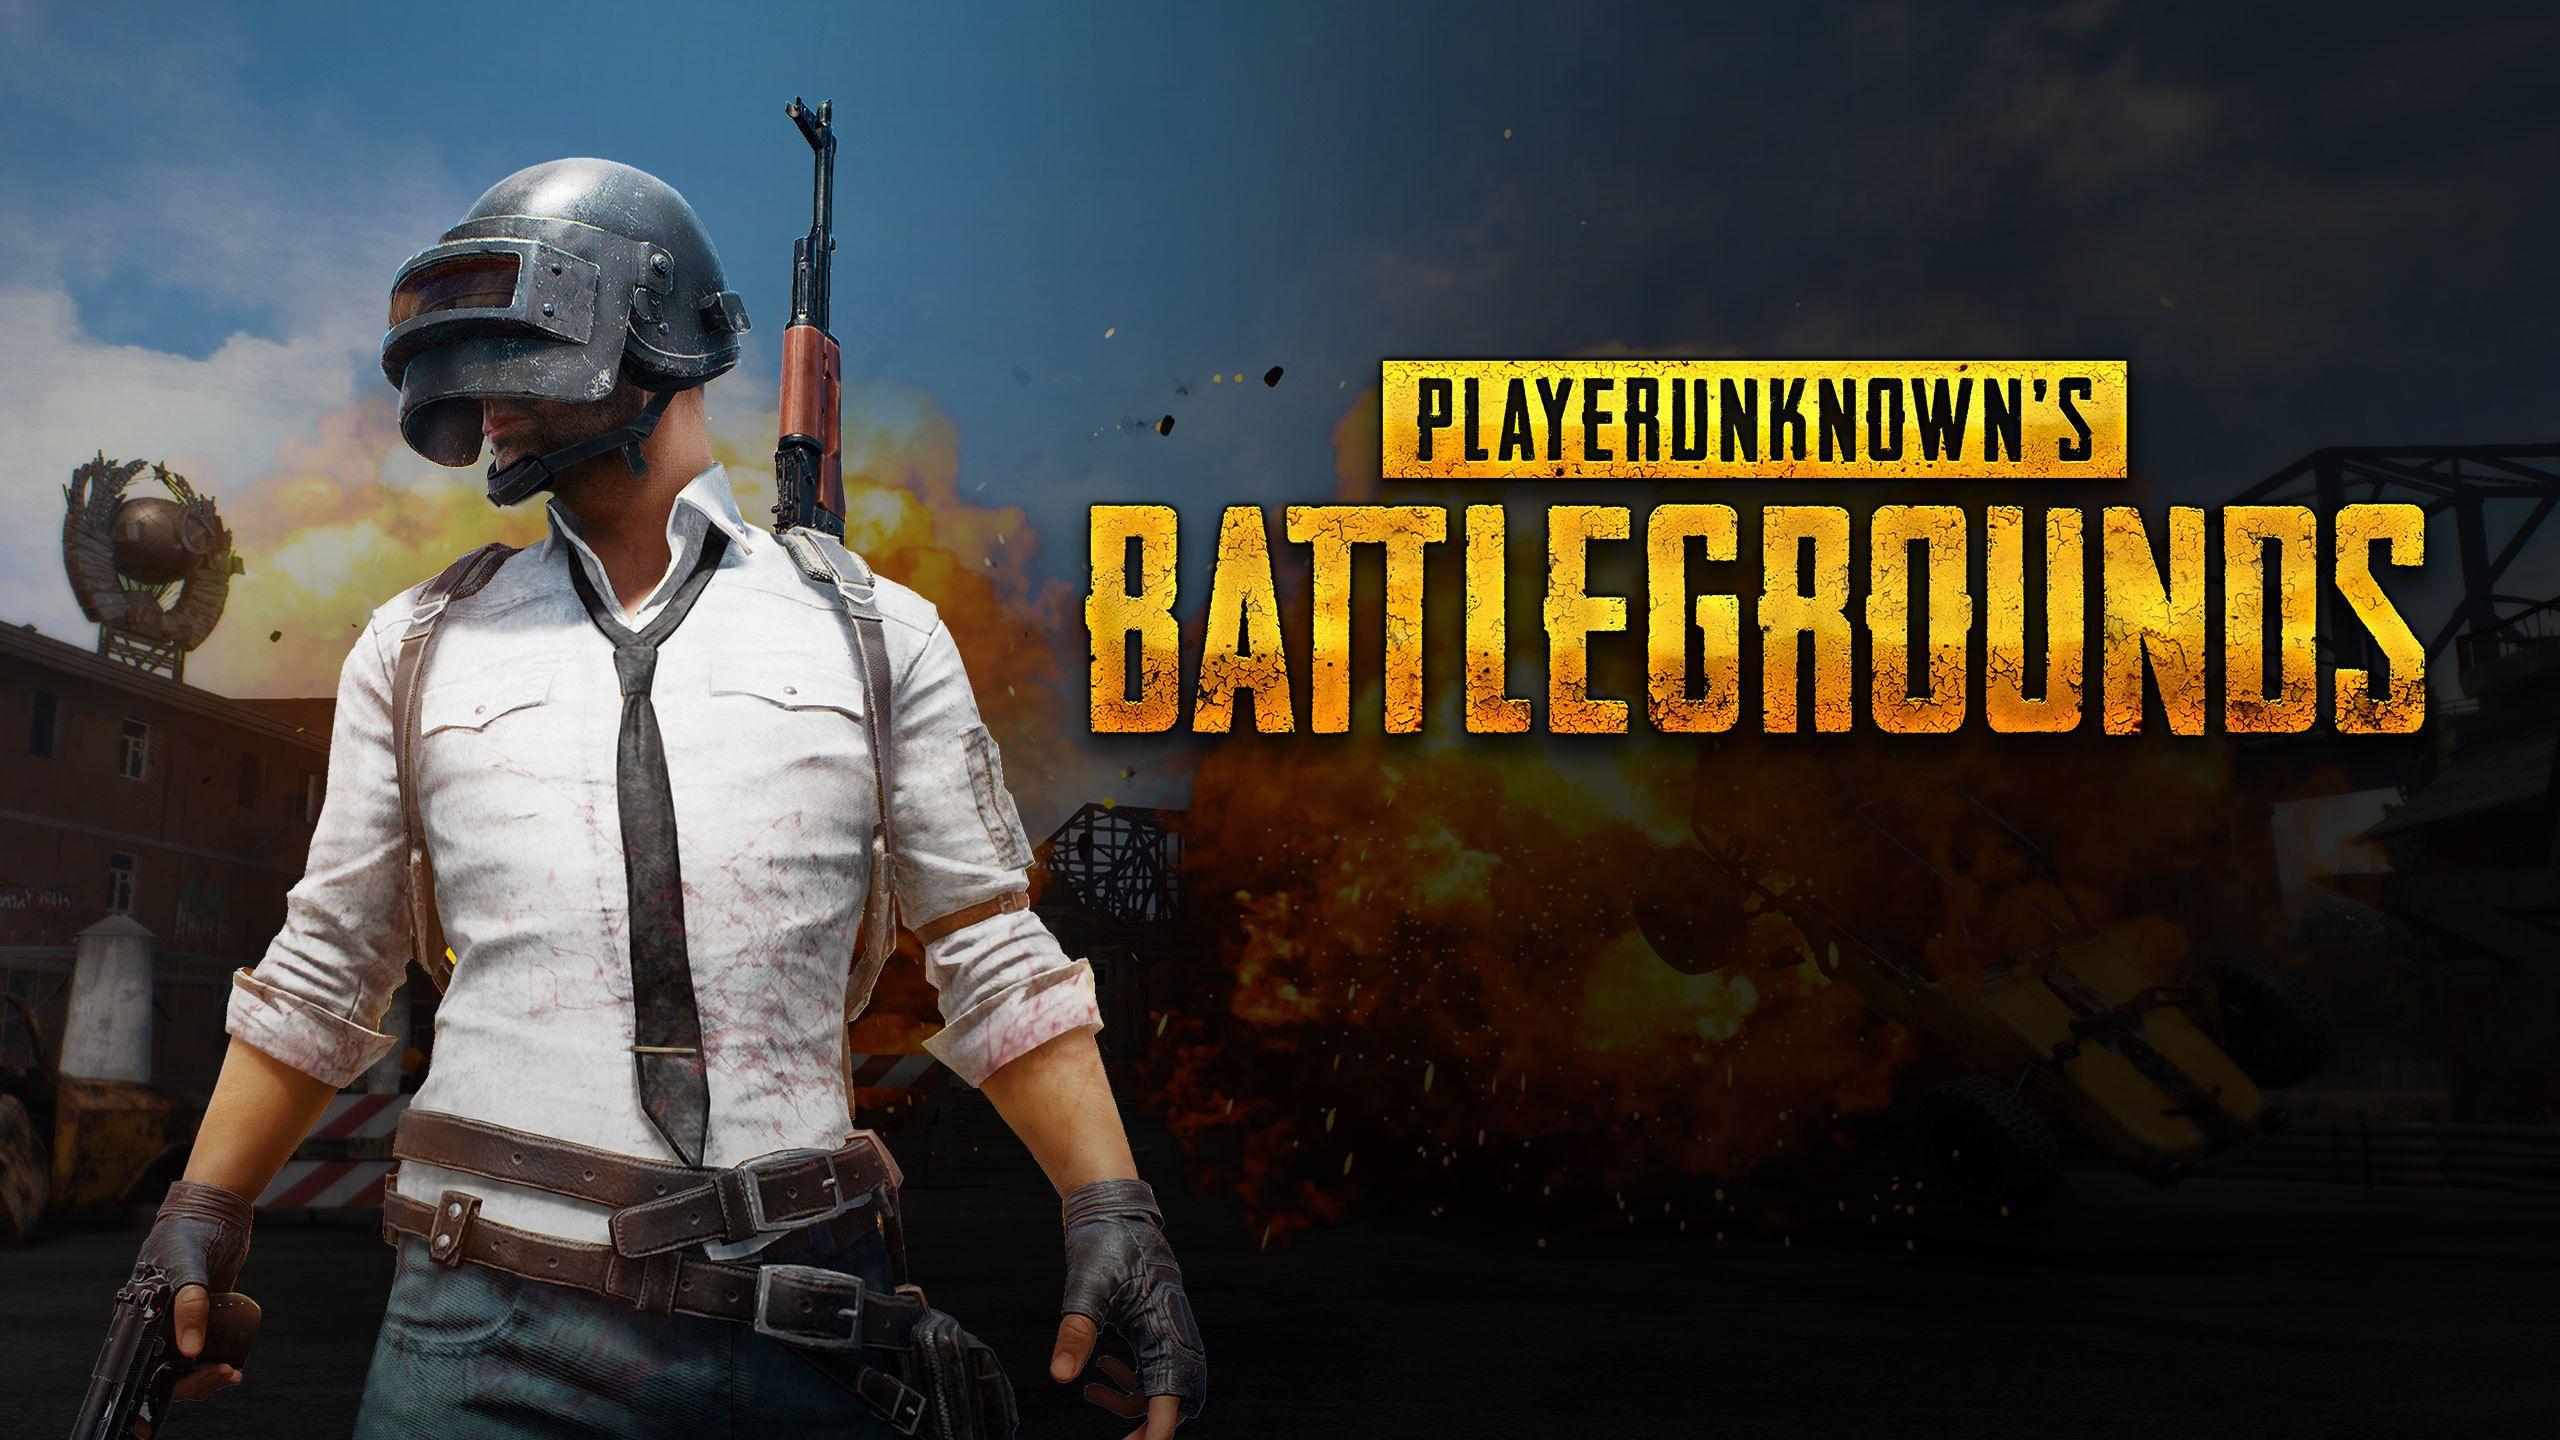 PUBG briefly surpassed Dota 2 in concurrent players becoming the